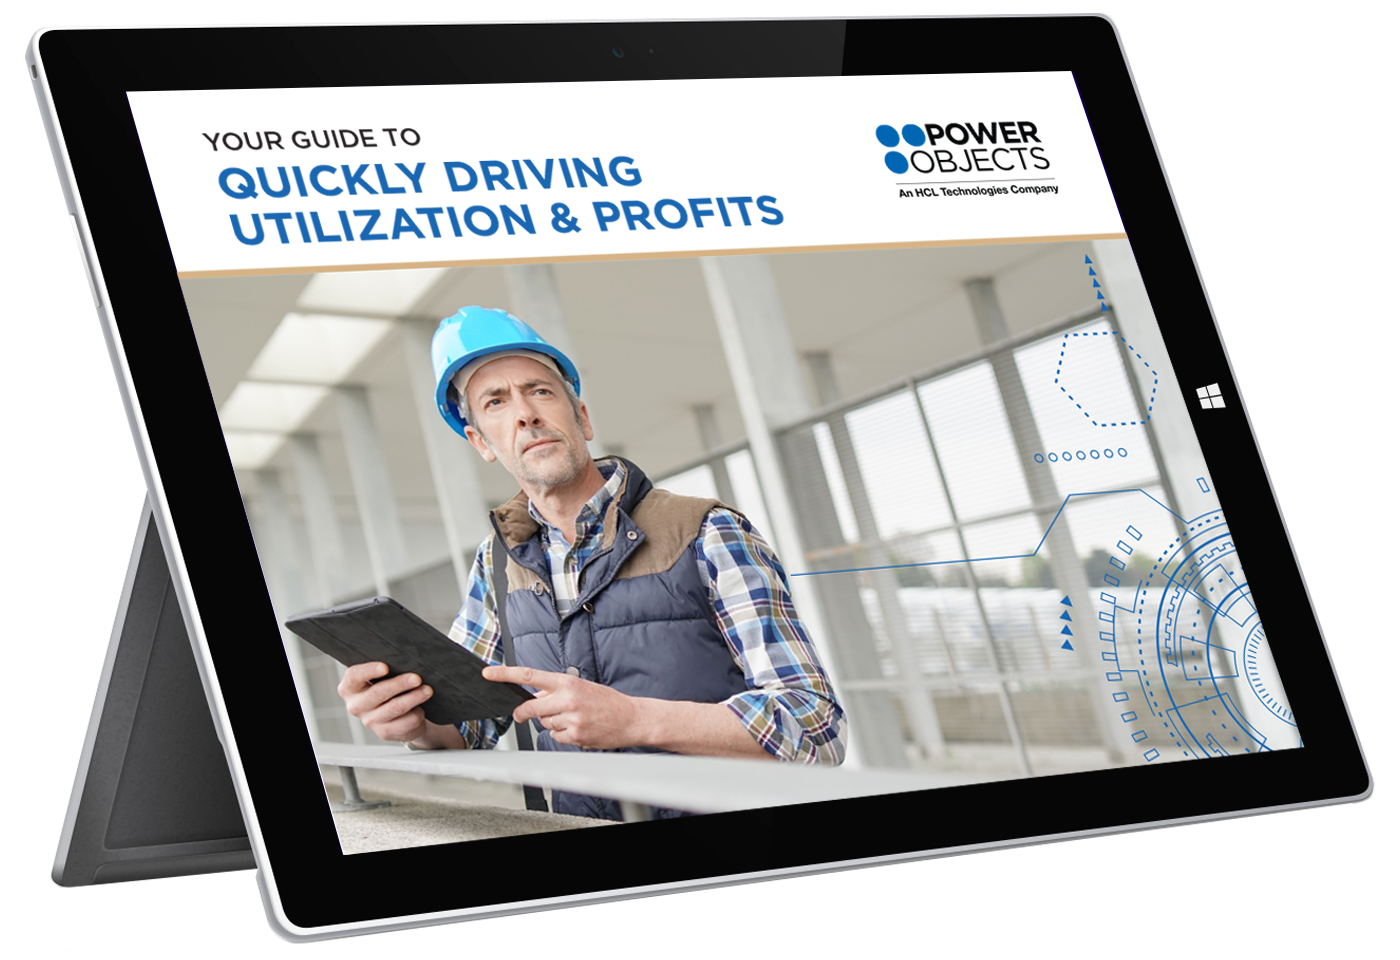 Your Guide to Quickly Driving Utilization & Profits